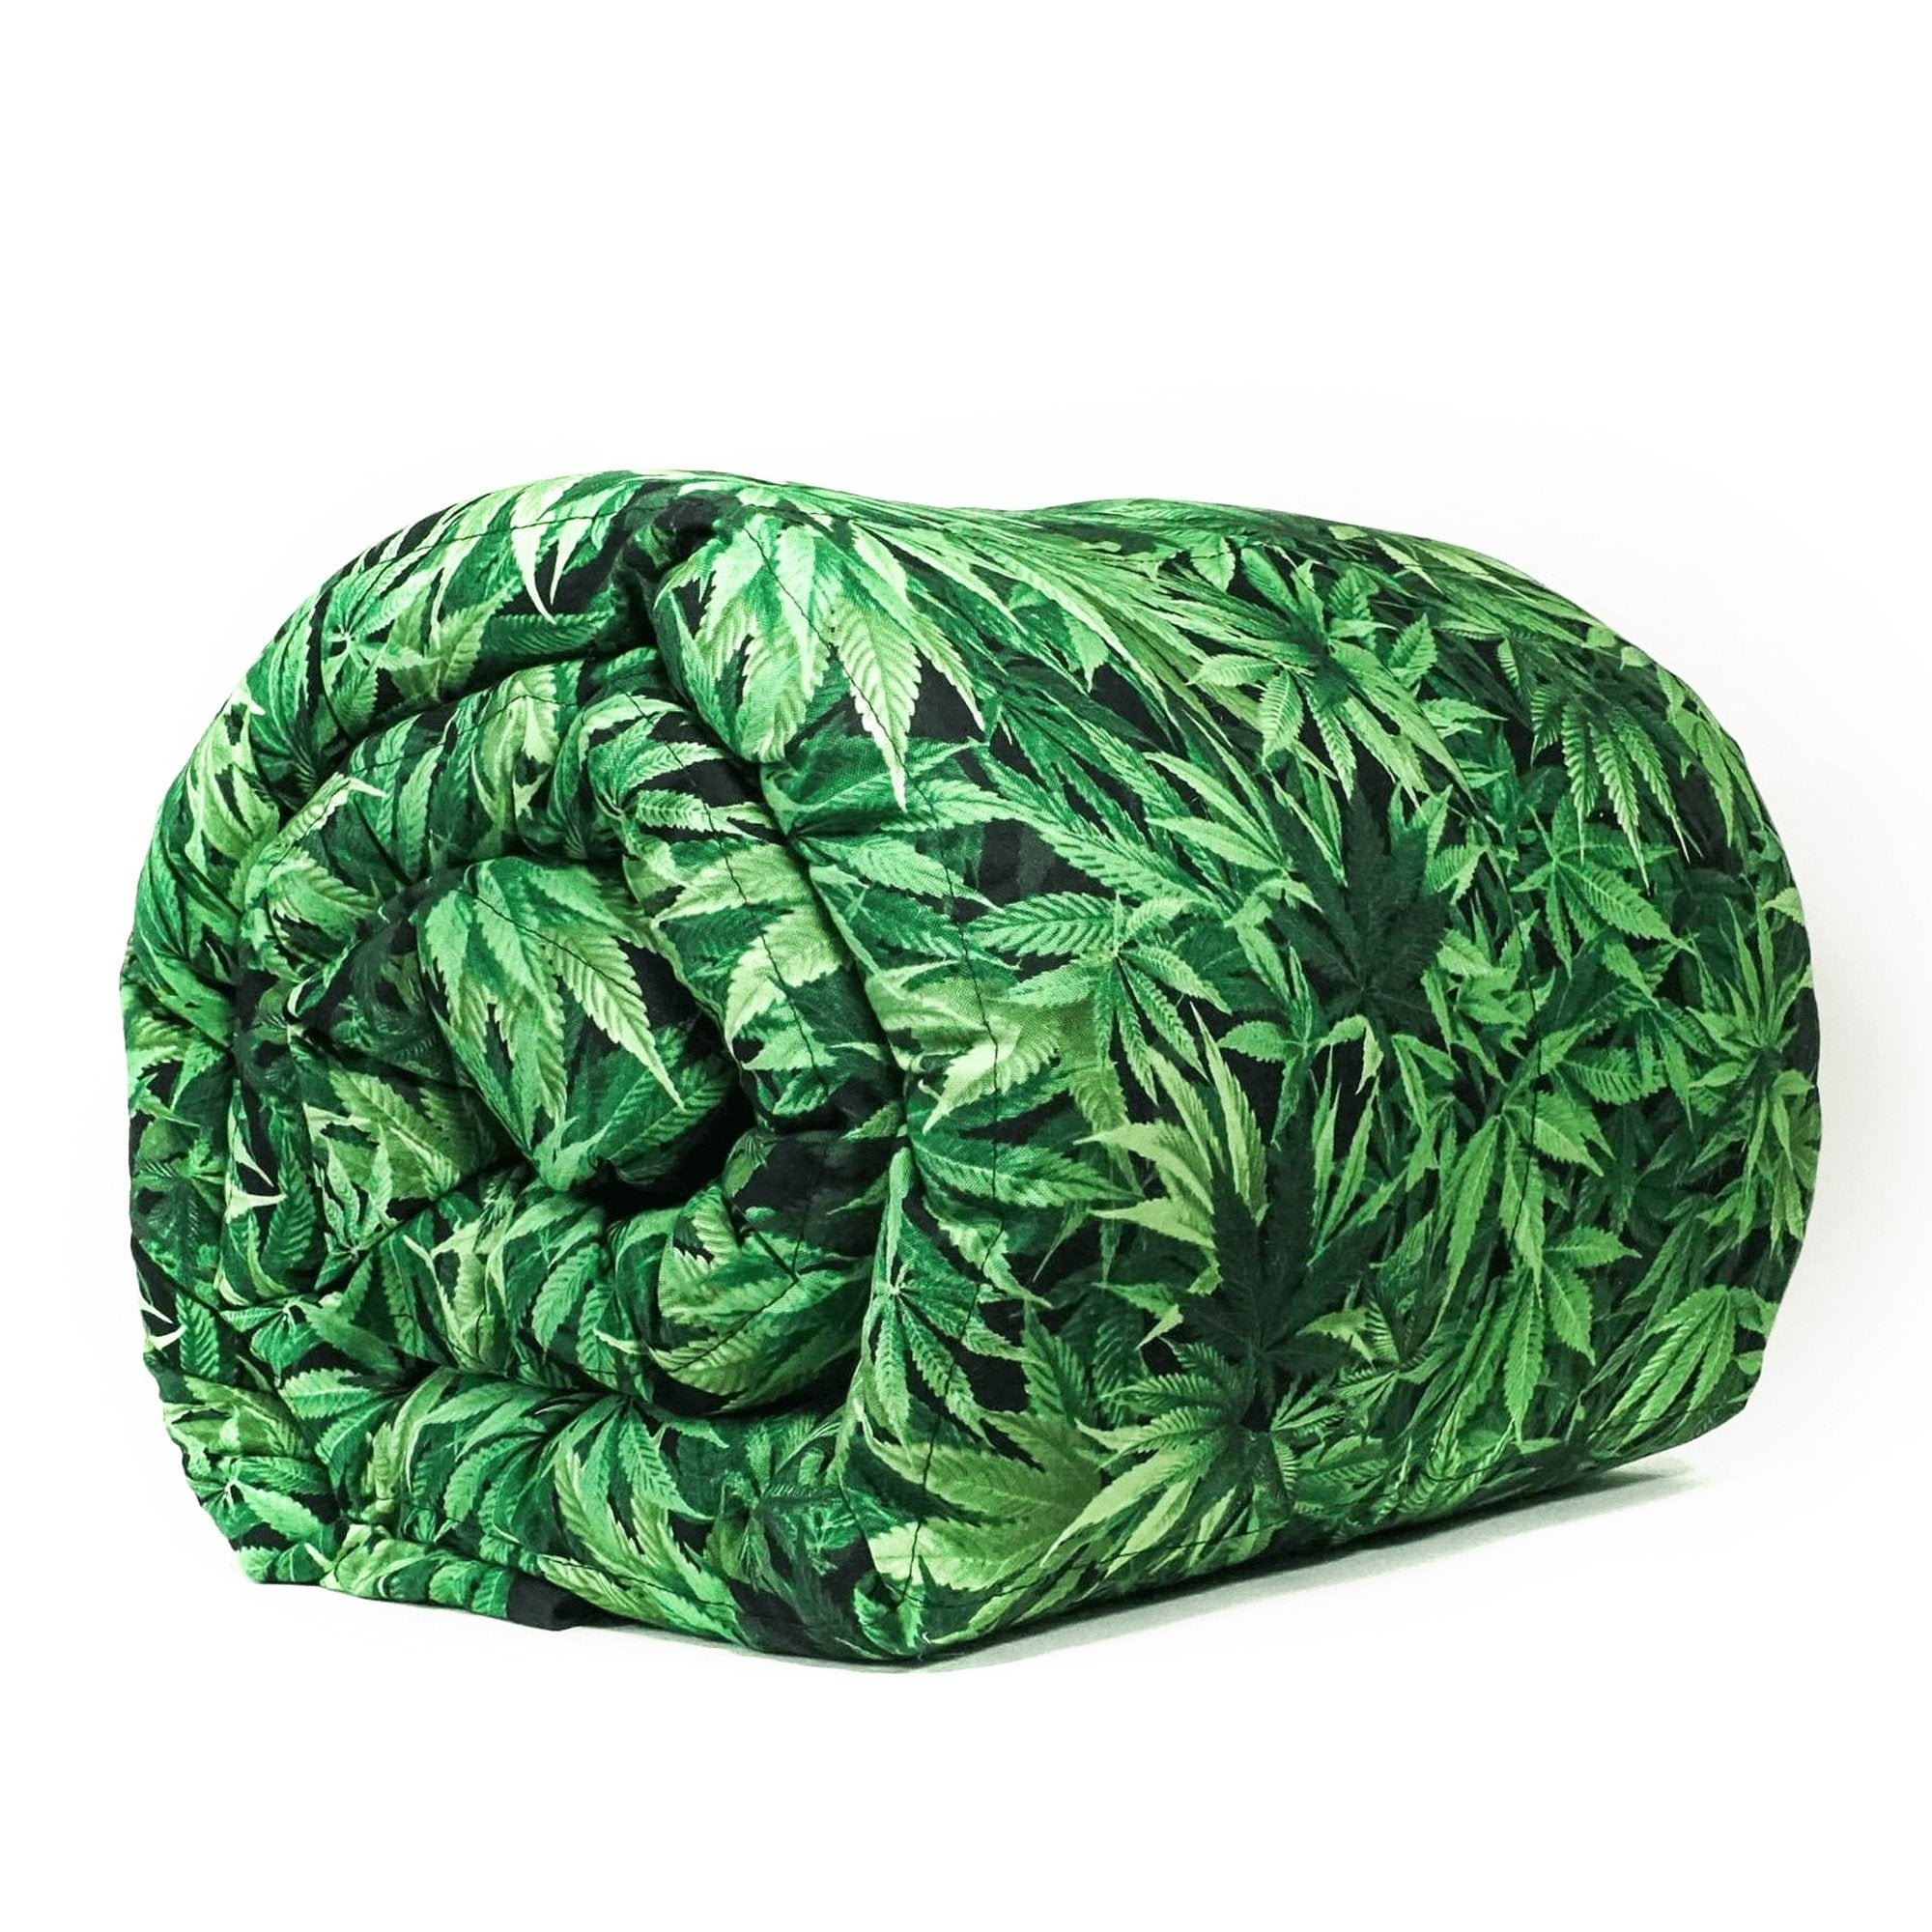 Mosaic Weighted Blankets CannaBliss Weighted Blanket